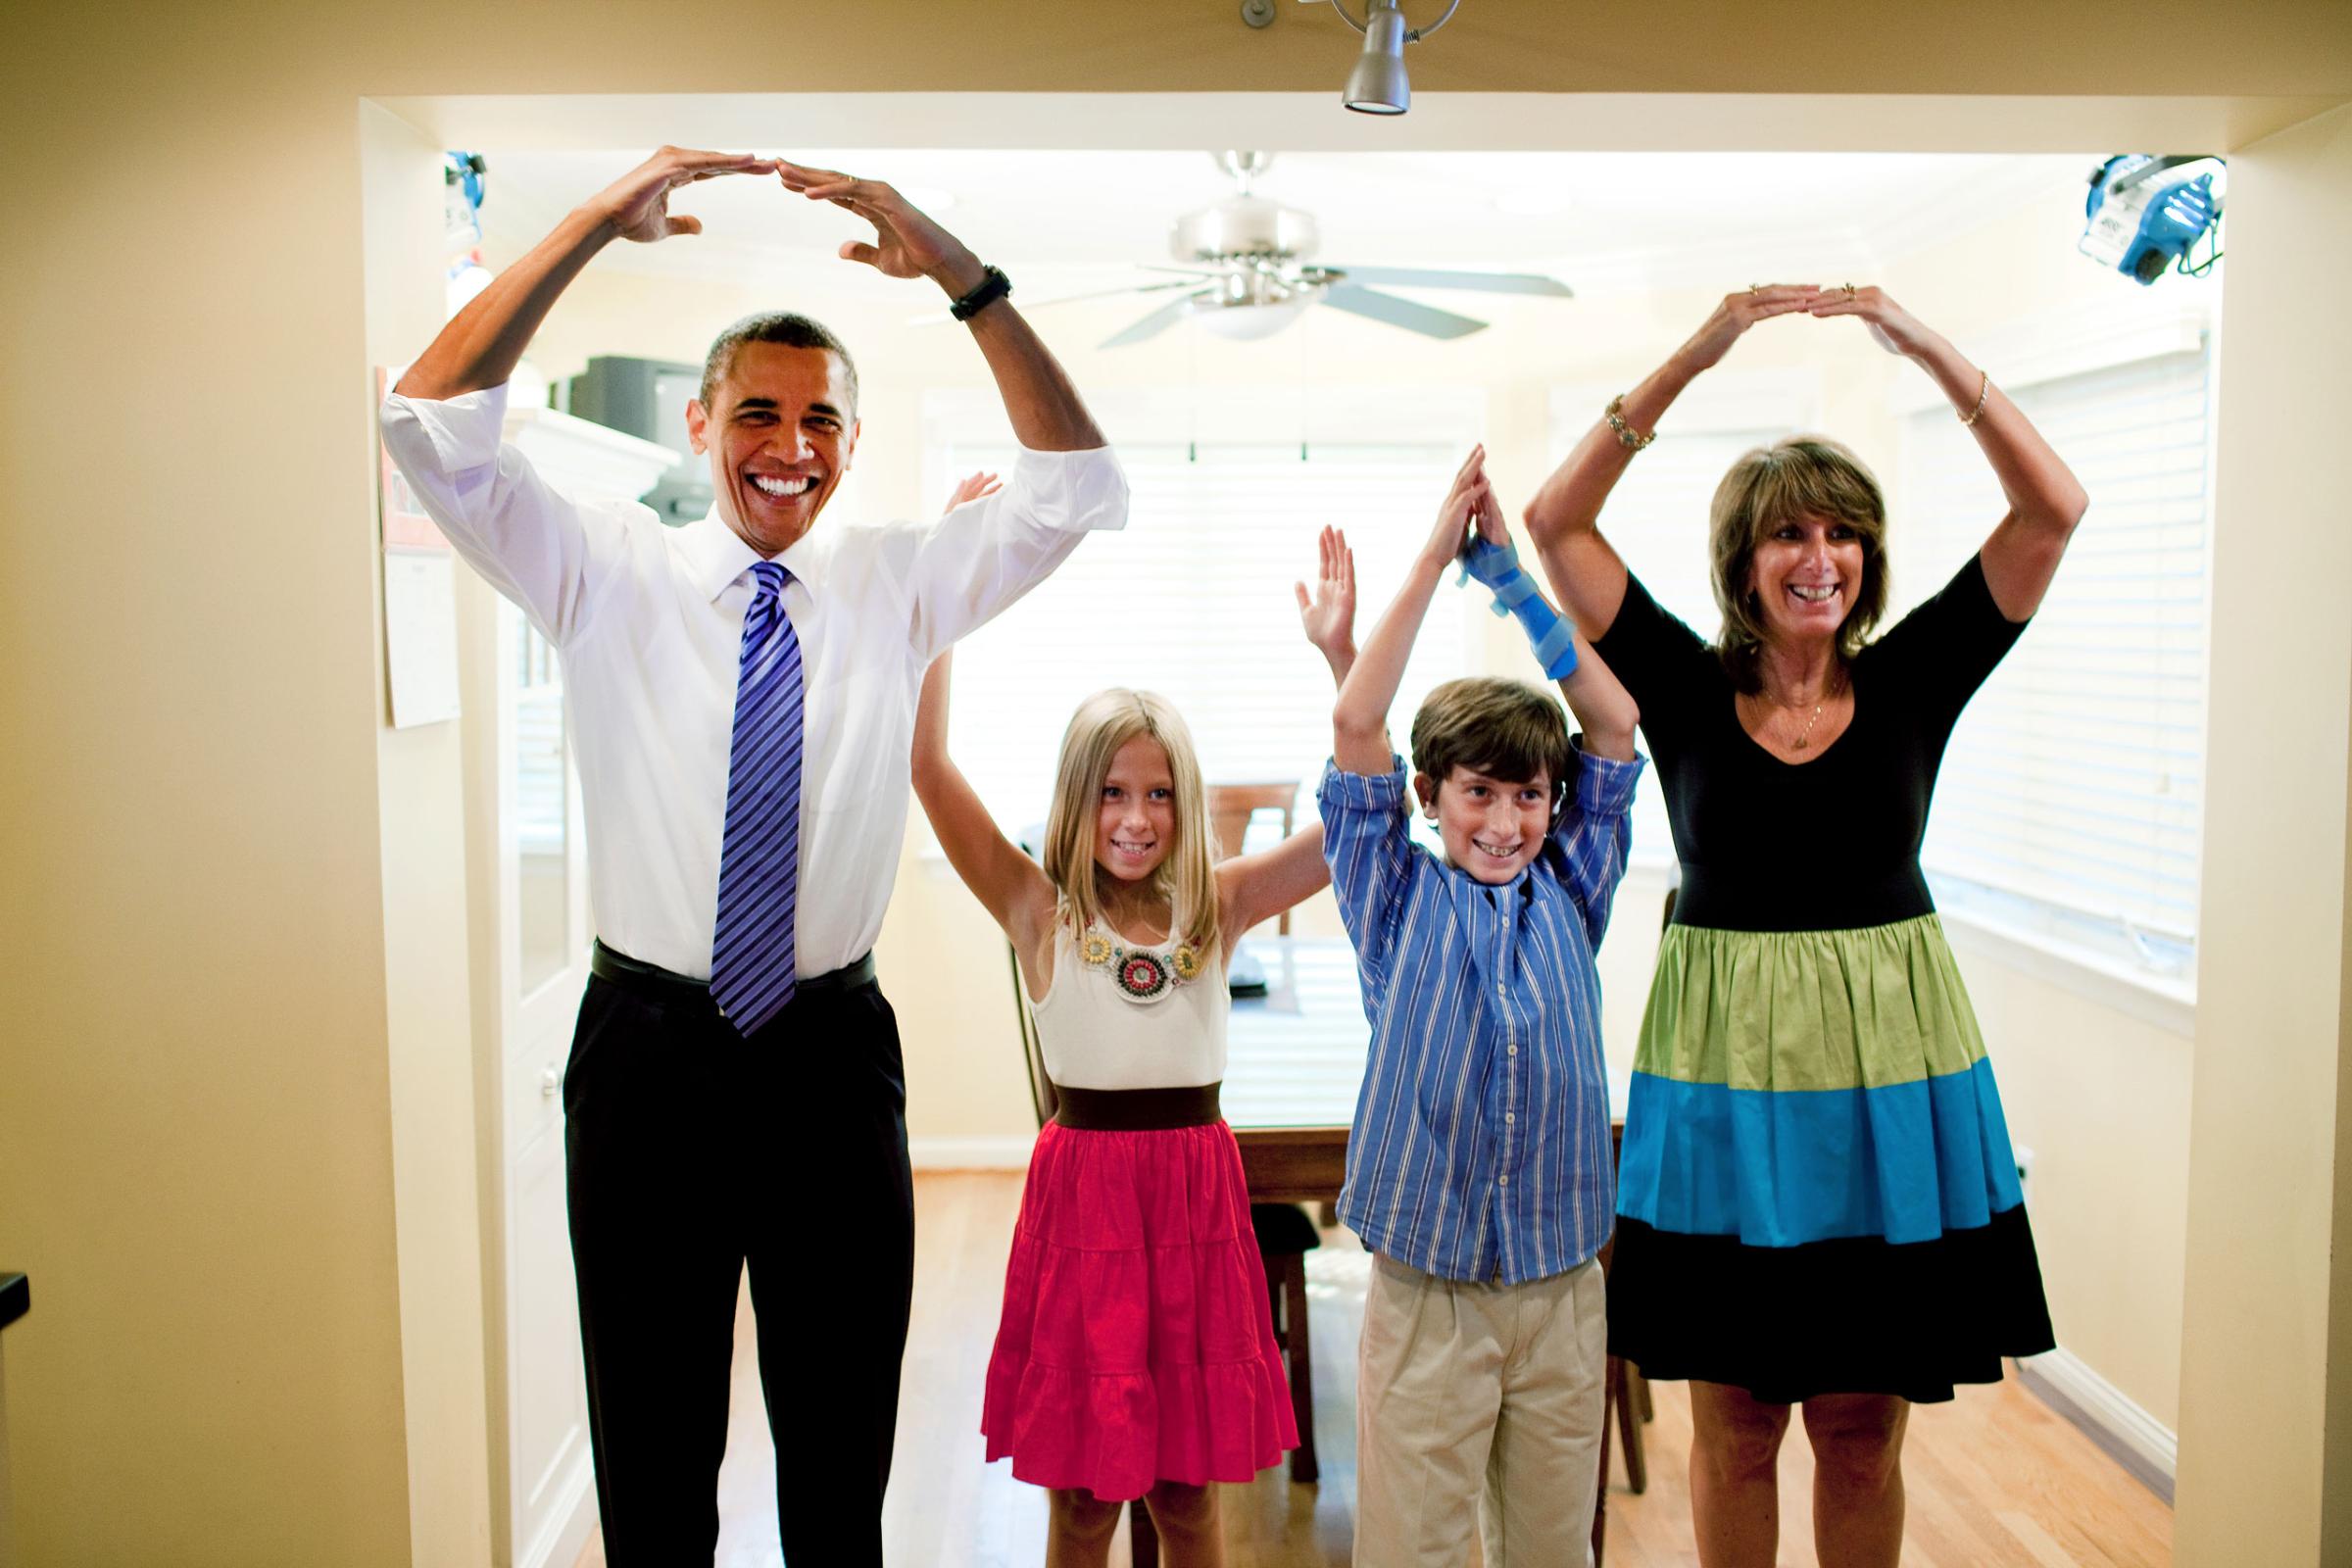 President Barack Obama helps spell out "Ohio" with the Weithman family, Rachel, 9, Josh, 11, and mom Rhonda, in their home in Columbus, Ohio, Aug. 18, 2010.